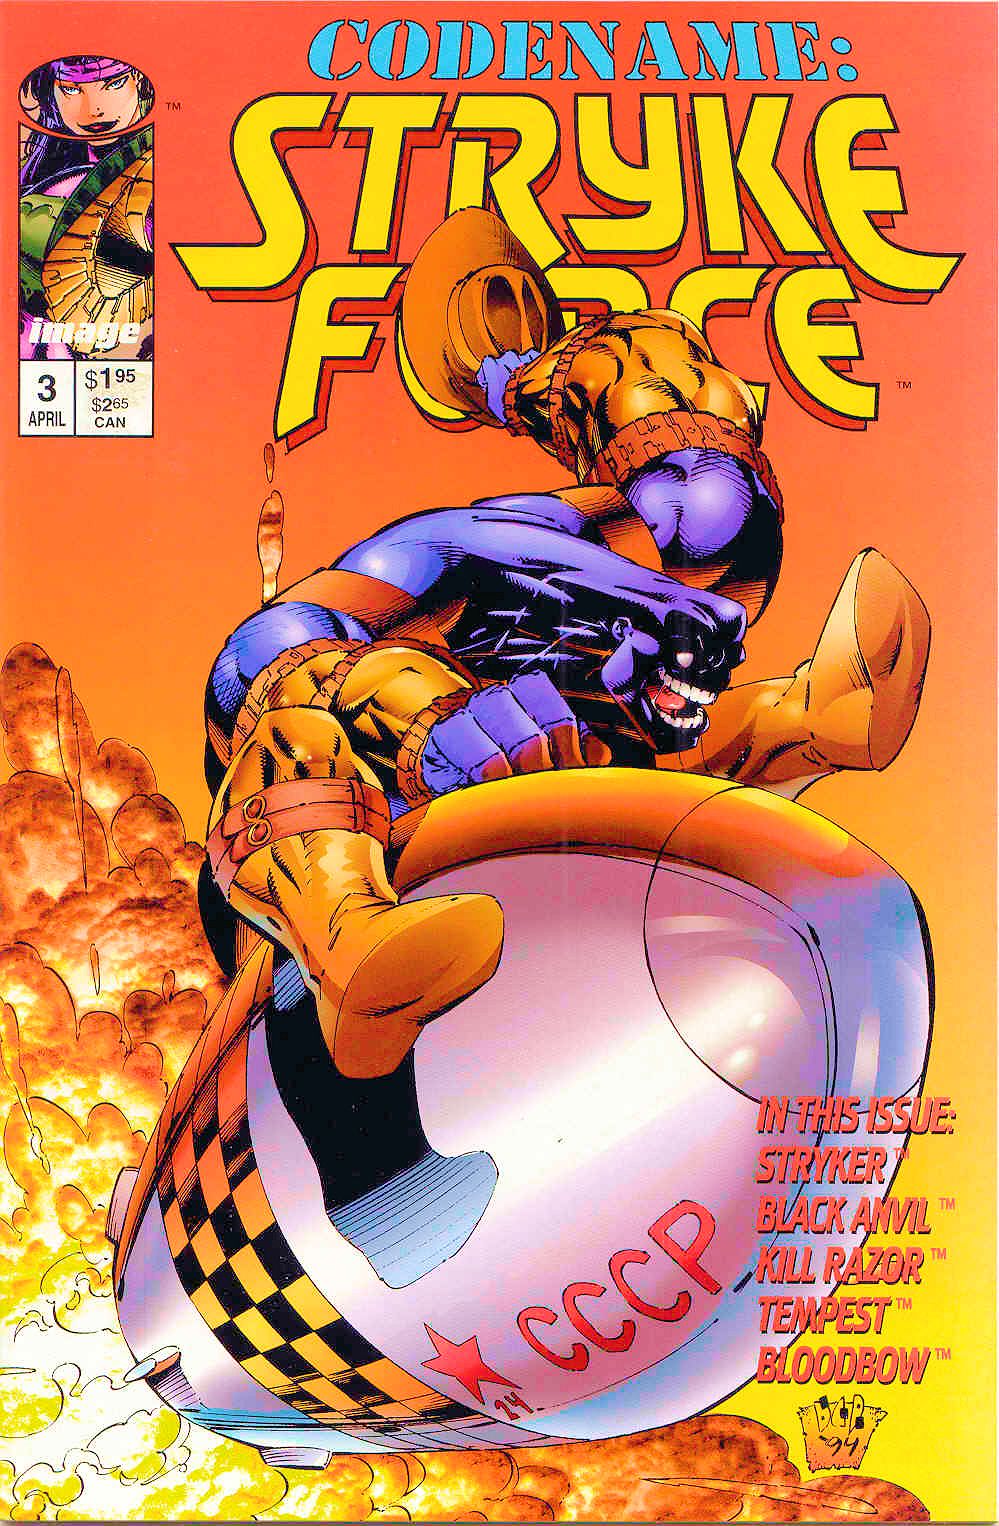 Read online Codename: Strykeforce comic -  Issue #3 - 1